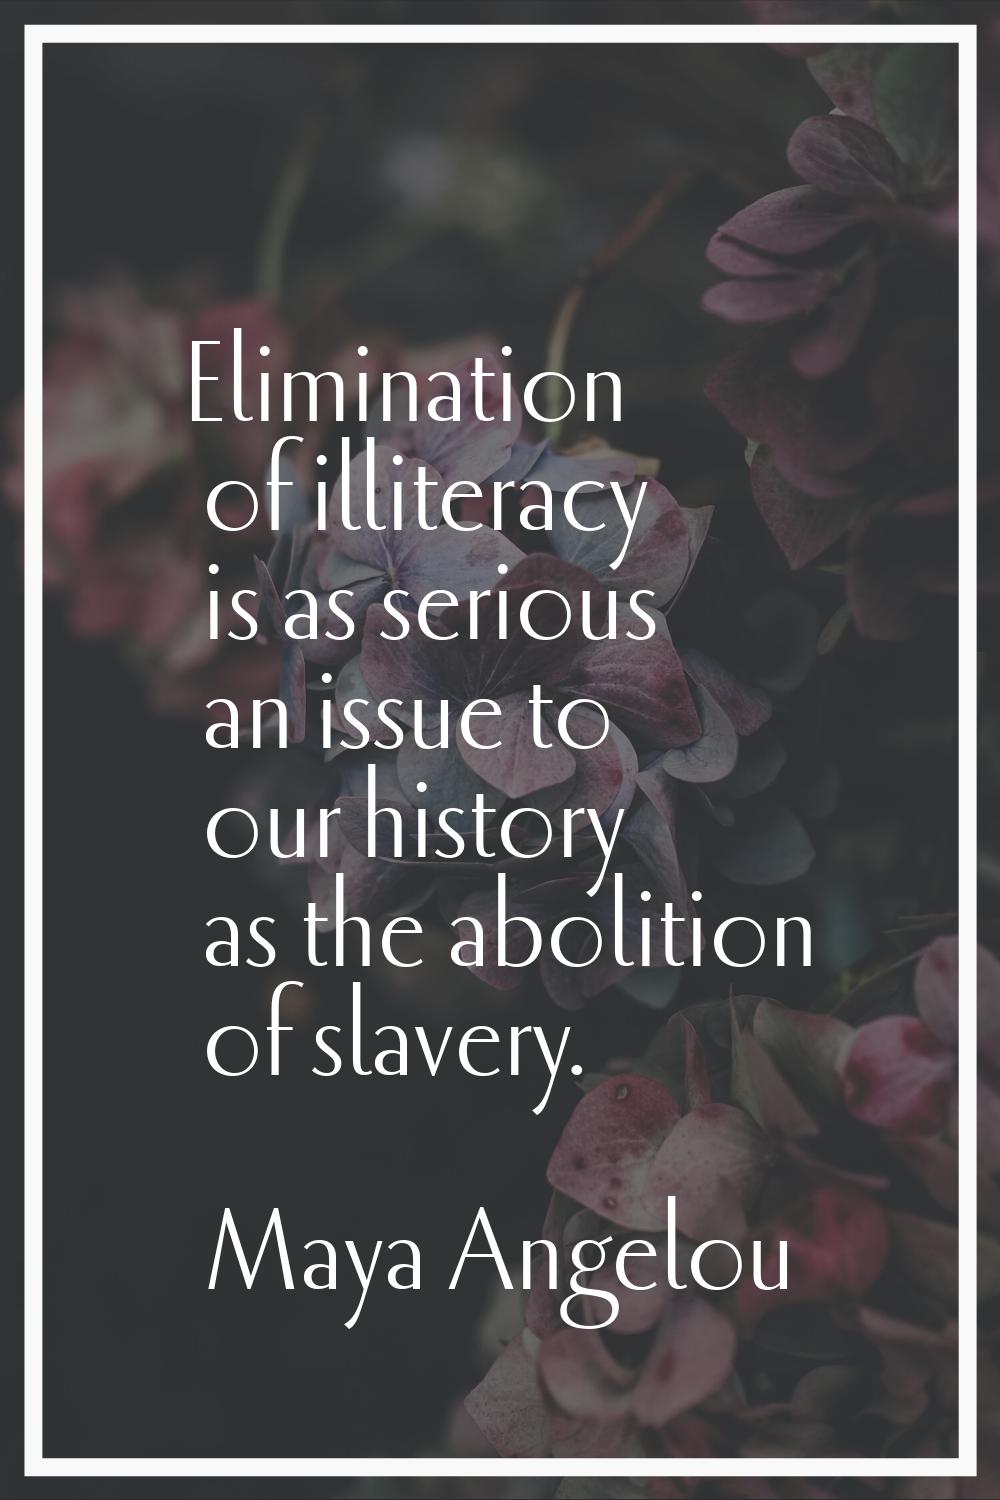 Elimination of illiteracy is as serious an issue to our history as the abolition of slavery.